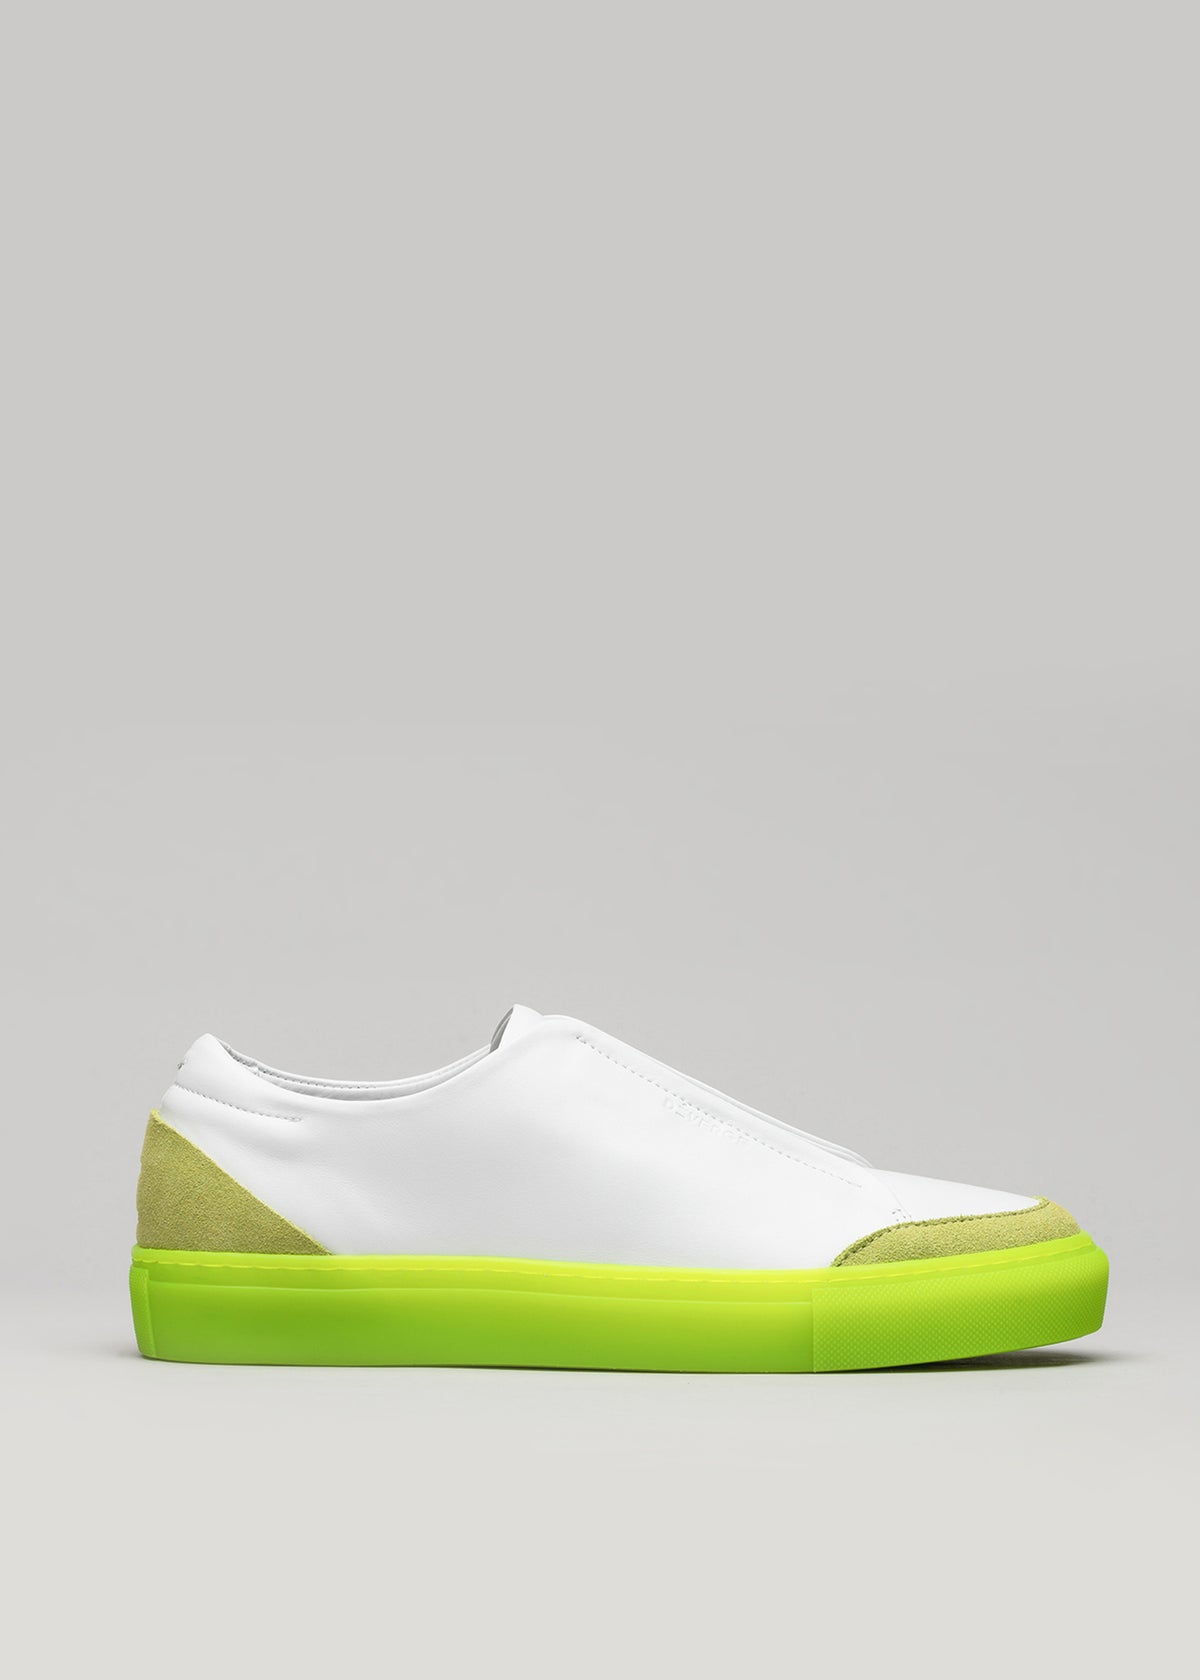 A V9 White Leather w/Lime slip-on sneaker with a neon green sole and a light green suede detail on the heel, displayed against a gray background.